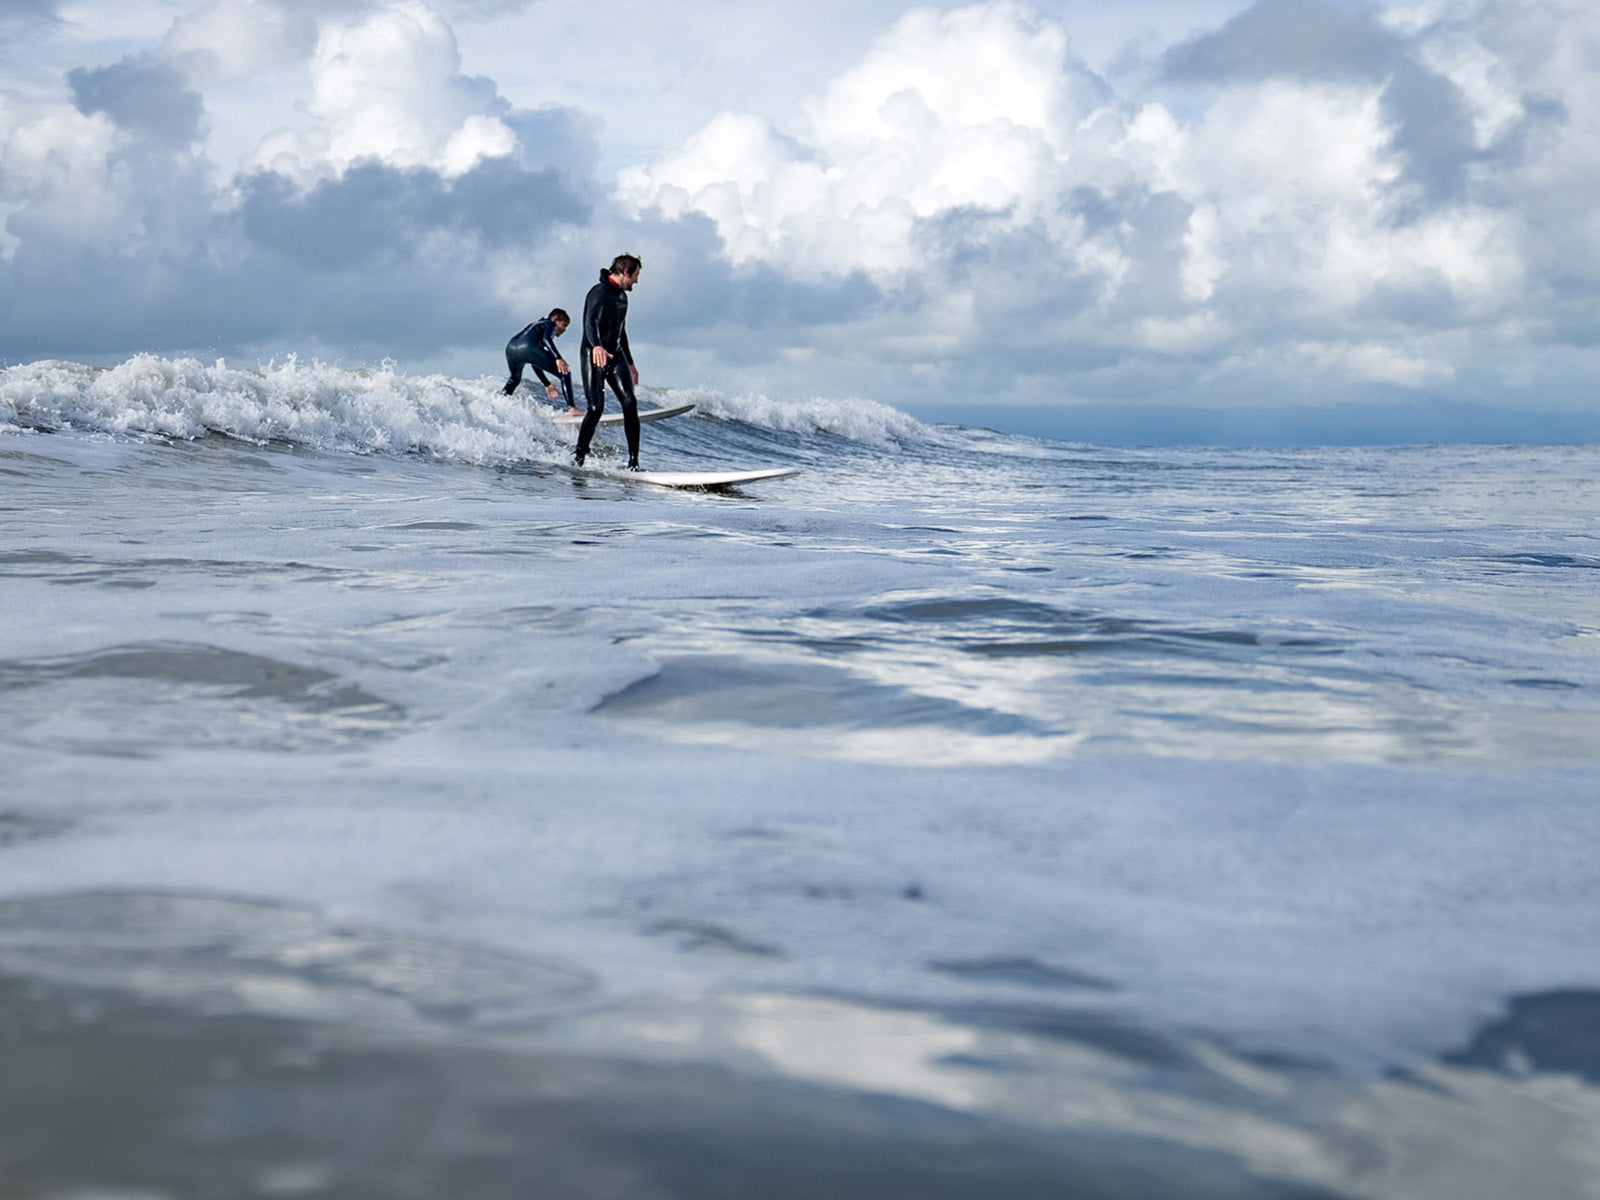 Yakutat Surf Club member Jackson Wolfe stands up on his first glassy wave with surf mentor Kanaan Bausler. Yakutat, Alaska. Photo: Chelsea Jolly